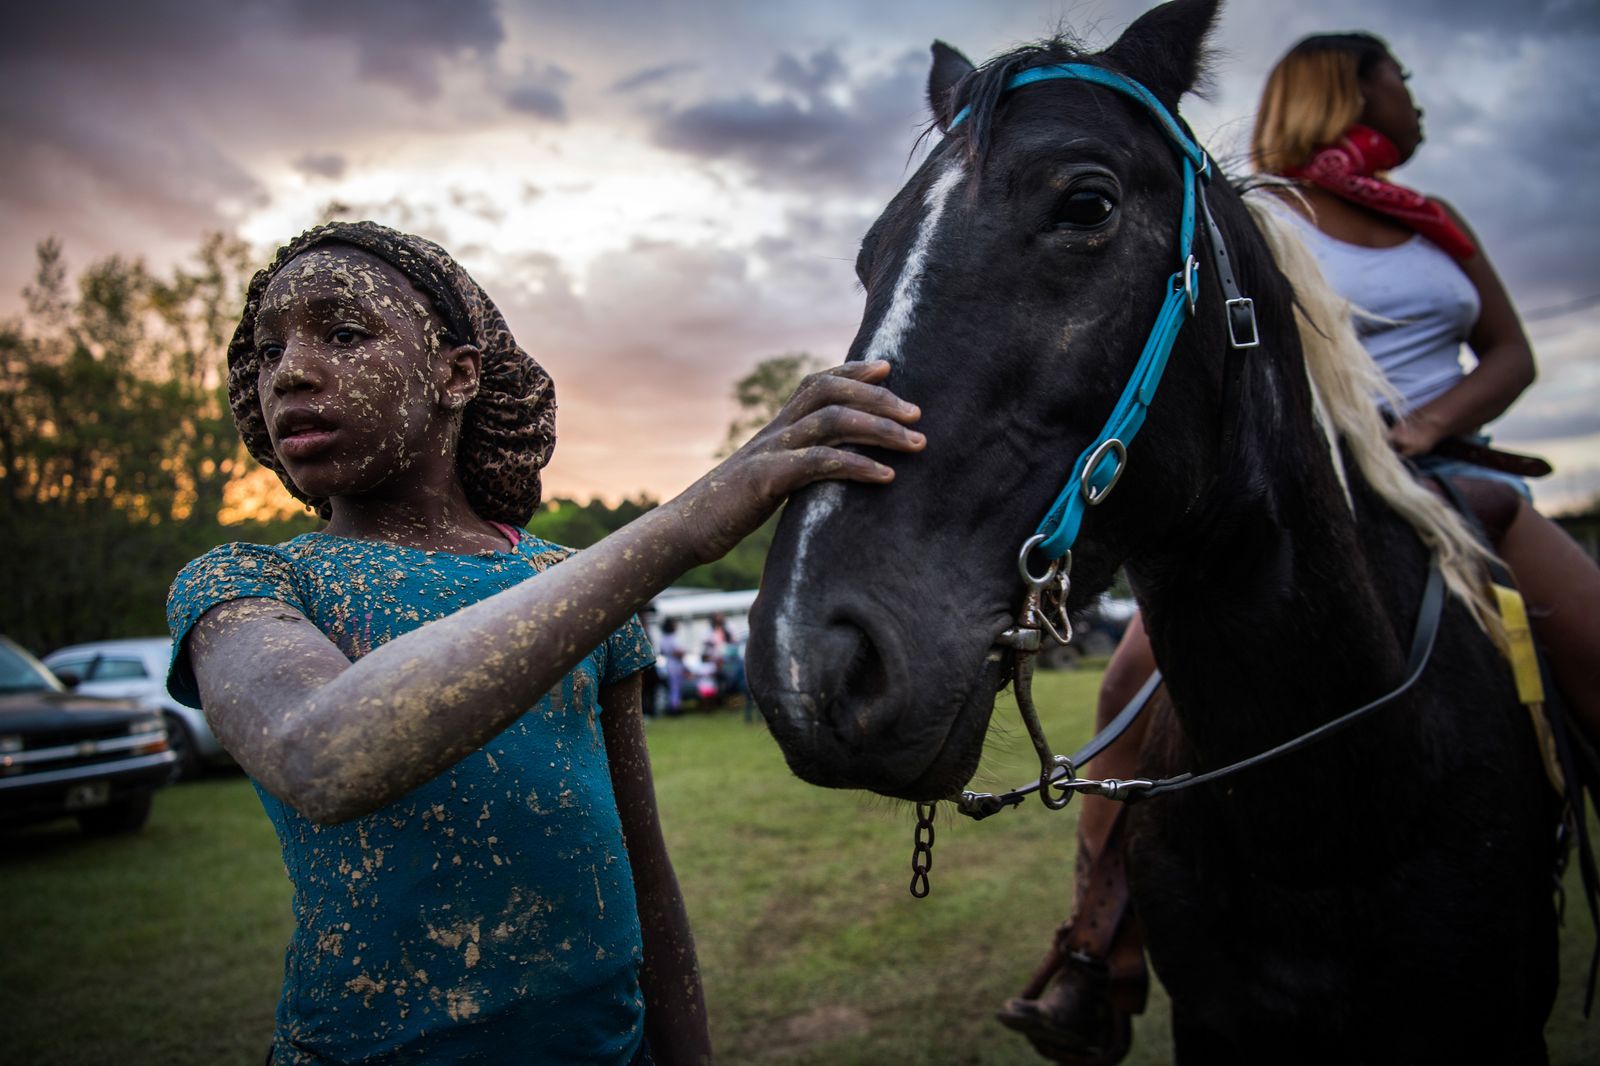 © Rory Doyle - Bree Gary pets her friend’s horse during a muddy trail ride in Charleston, Mississippi on April 27, 2019.